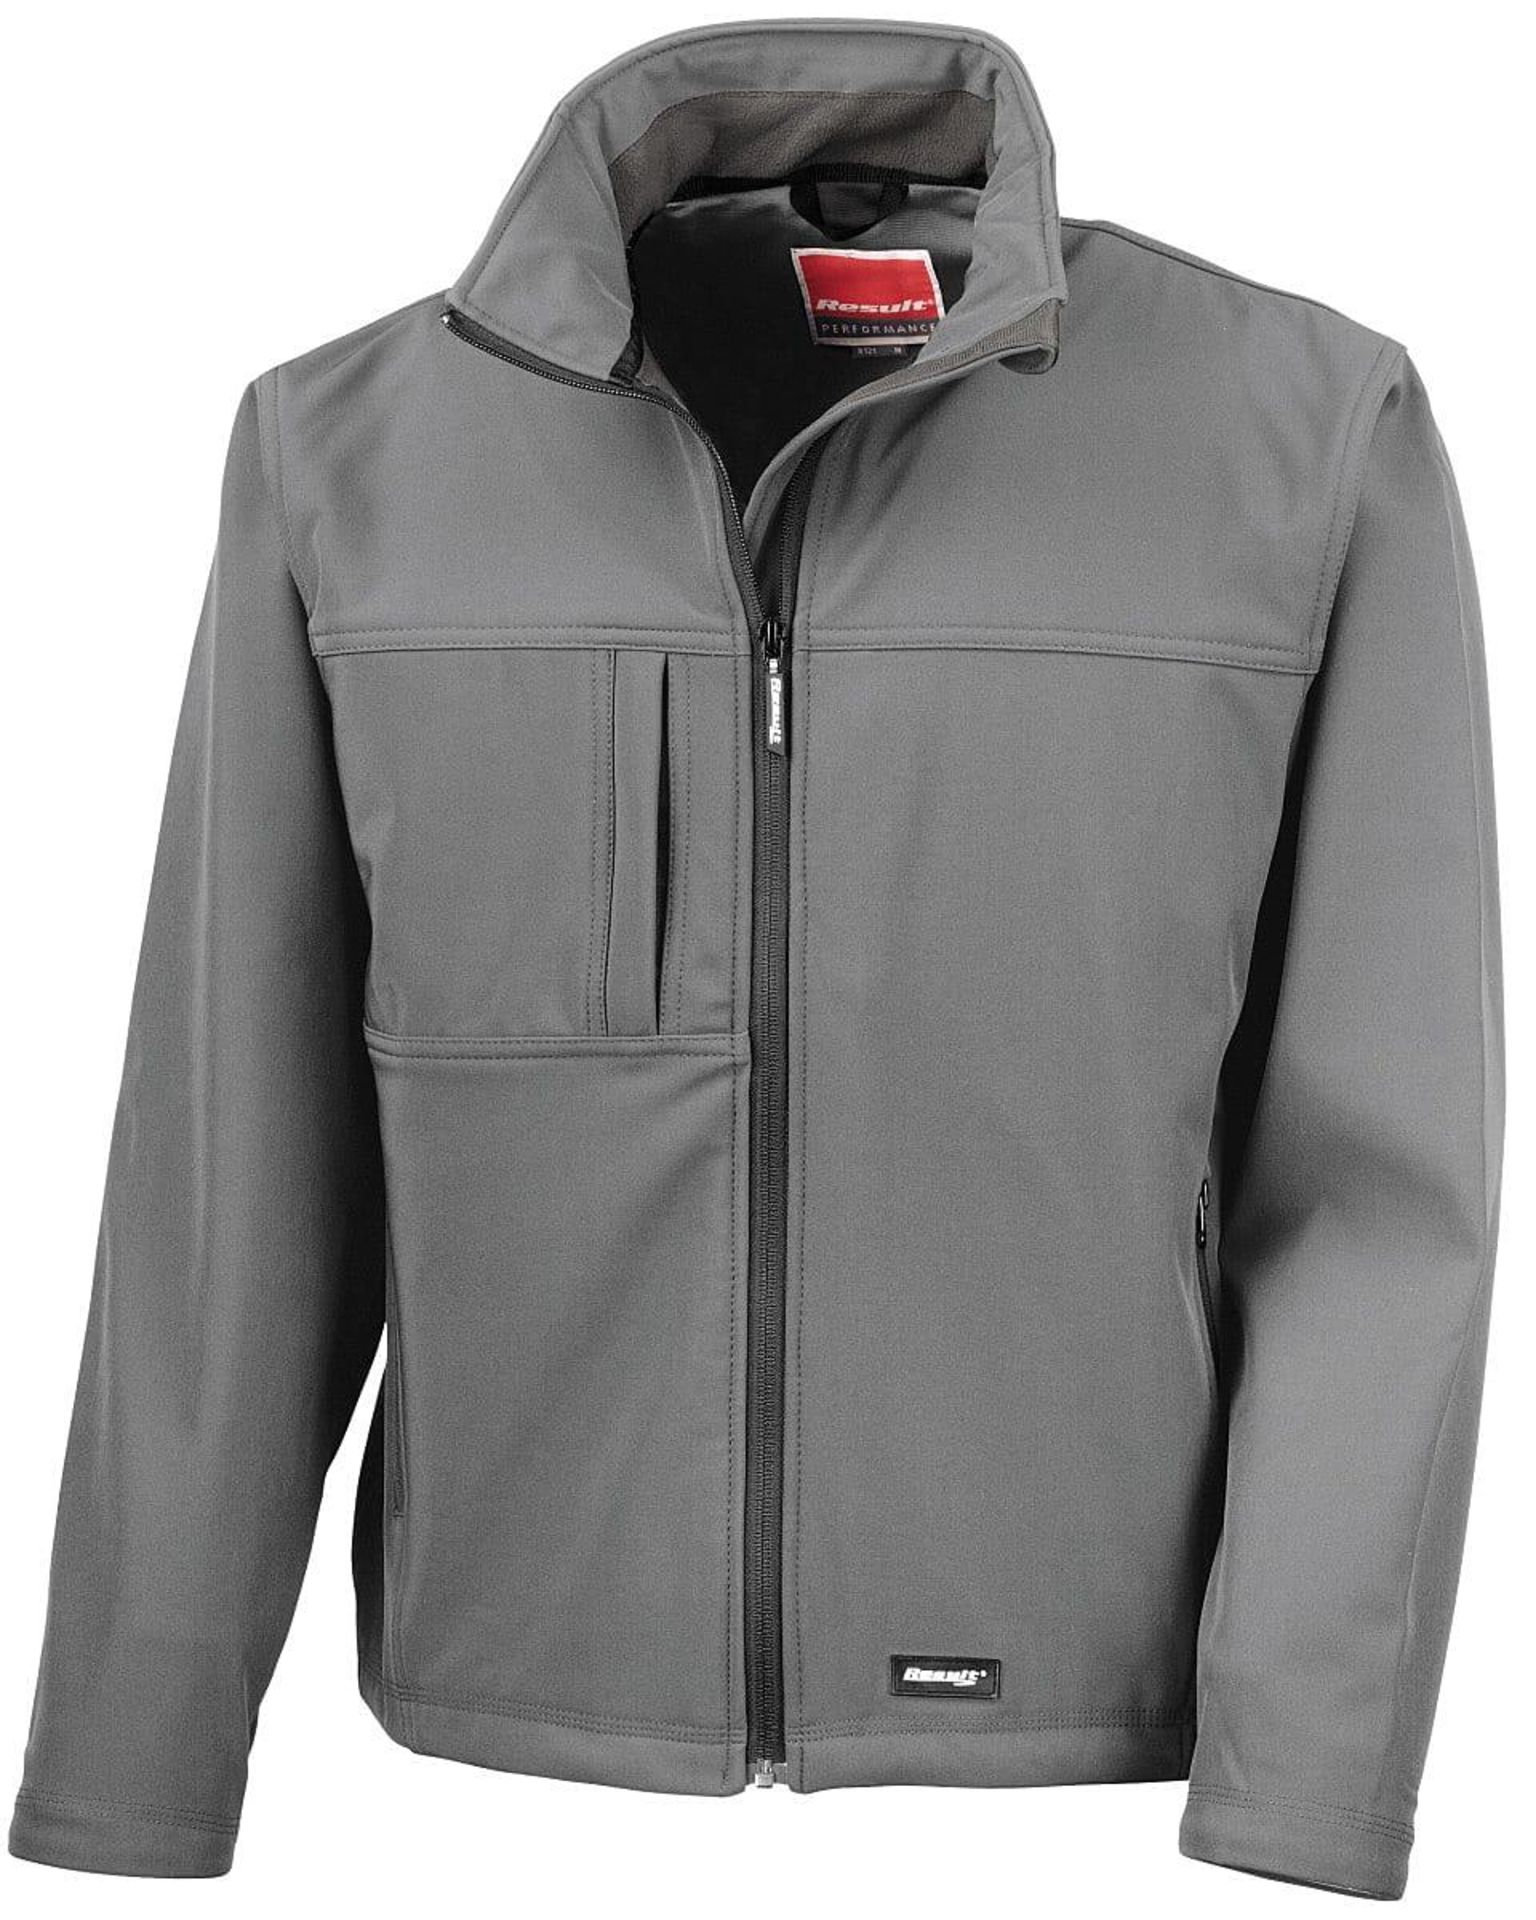 RRP £29.99 each 2 x Result Classic Soft Shell Jackets - XL RRP 29.99 ea